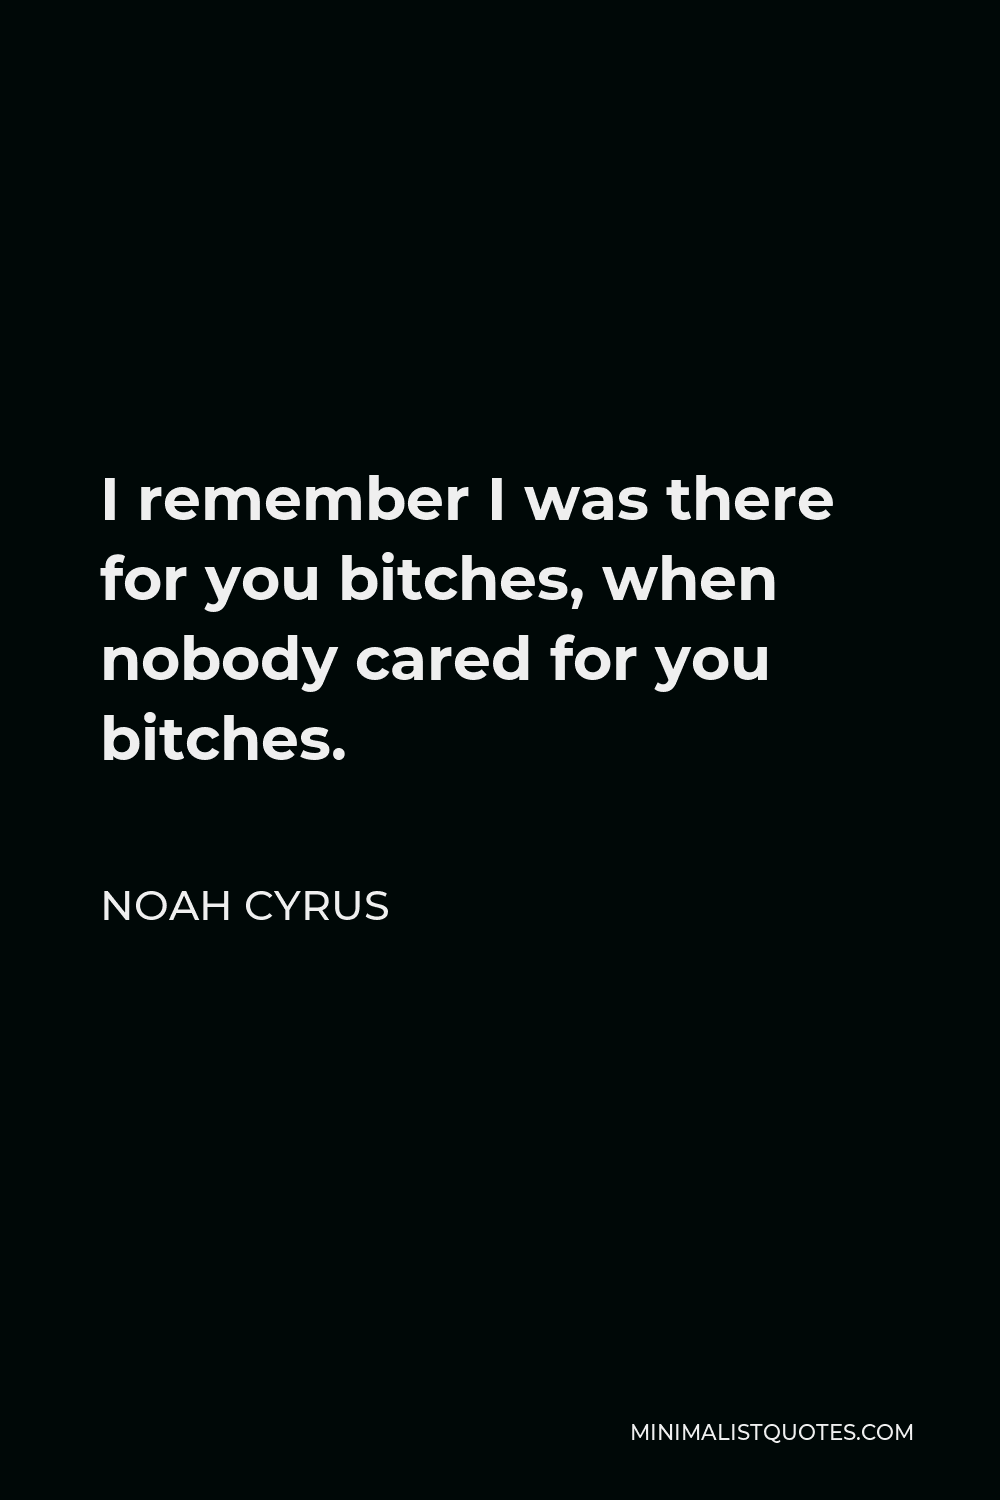 Noah Cyrus Quote - I remember I was there for you bitches, when nobody cared for you bitches.